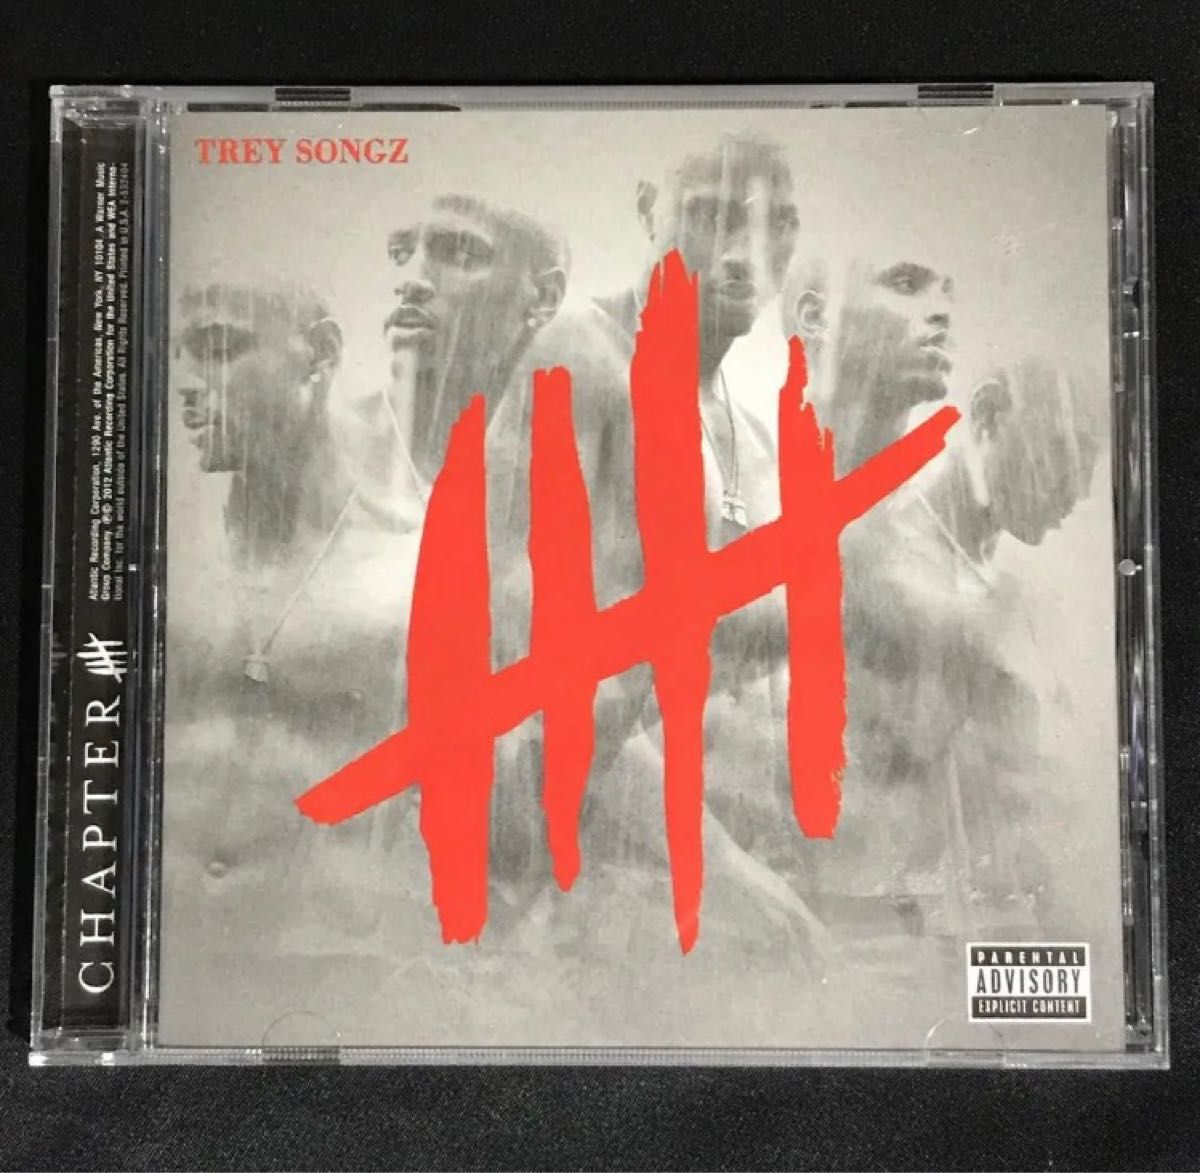 TREY SONGZ / CHAPTER 5 輸入盤 CD